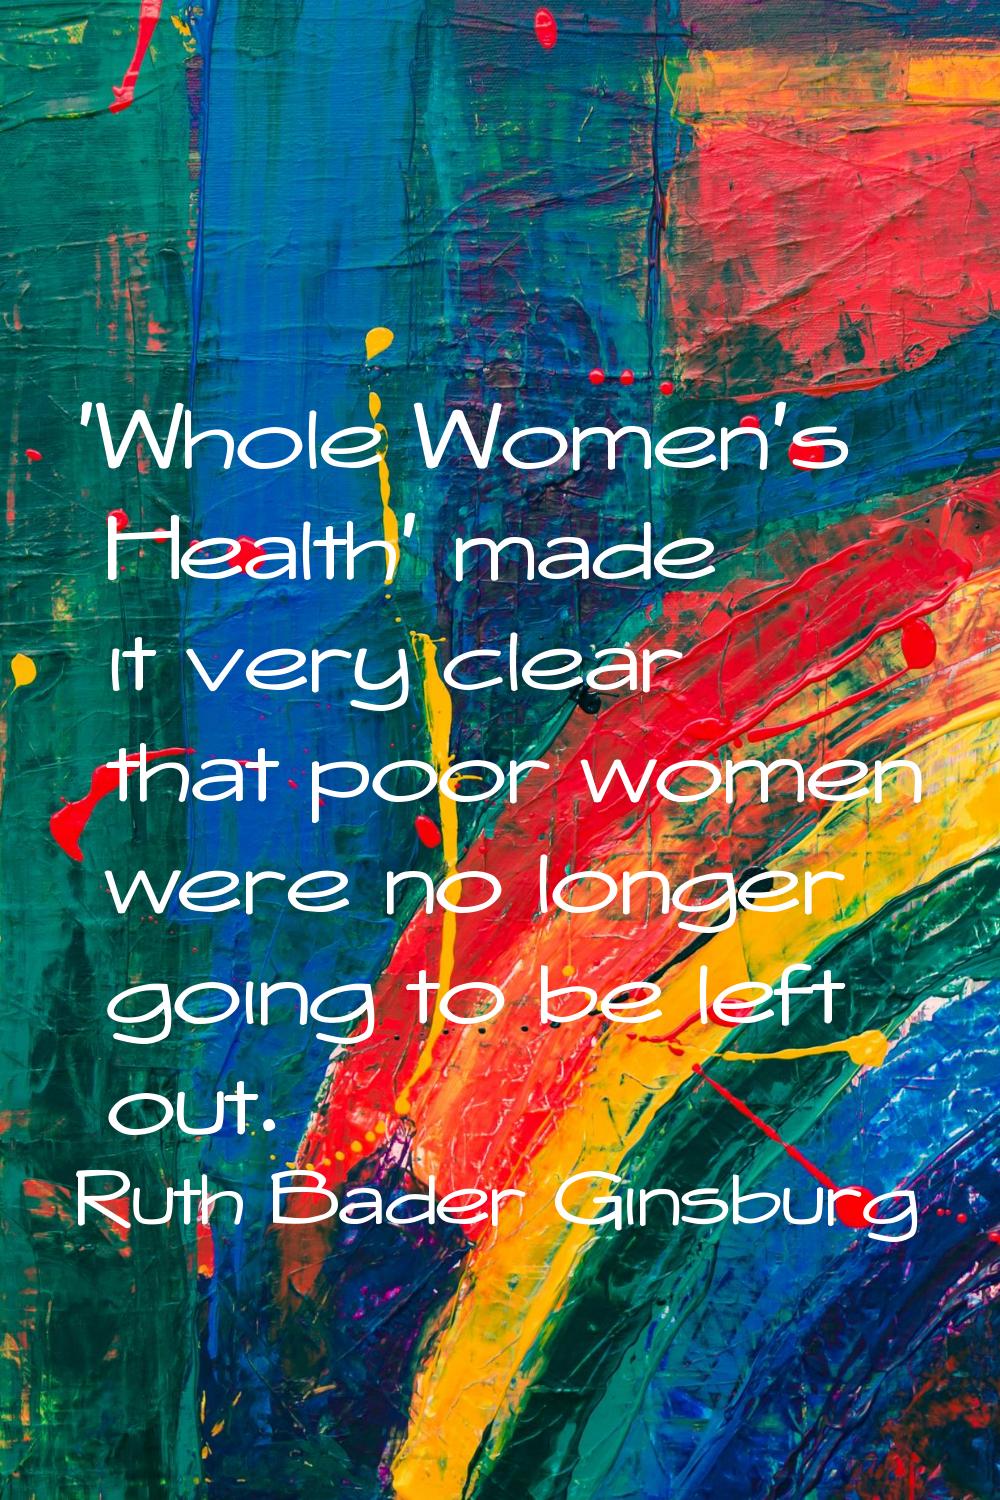 'Whole Women's Health' made it very clear that poor women were no longer going to be left out.